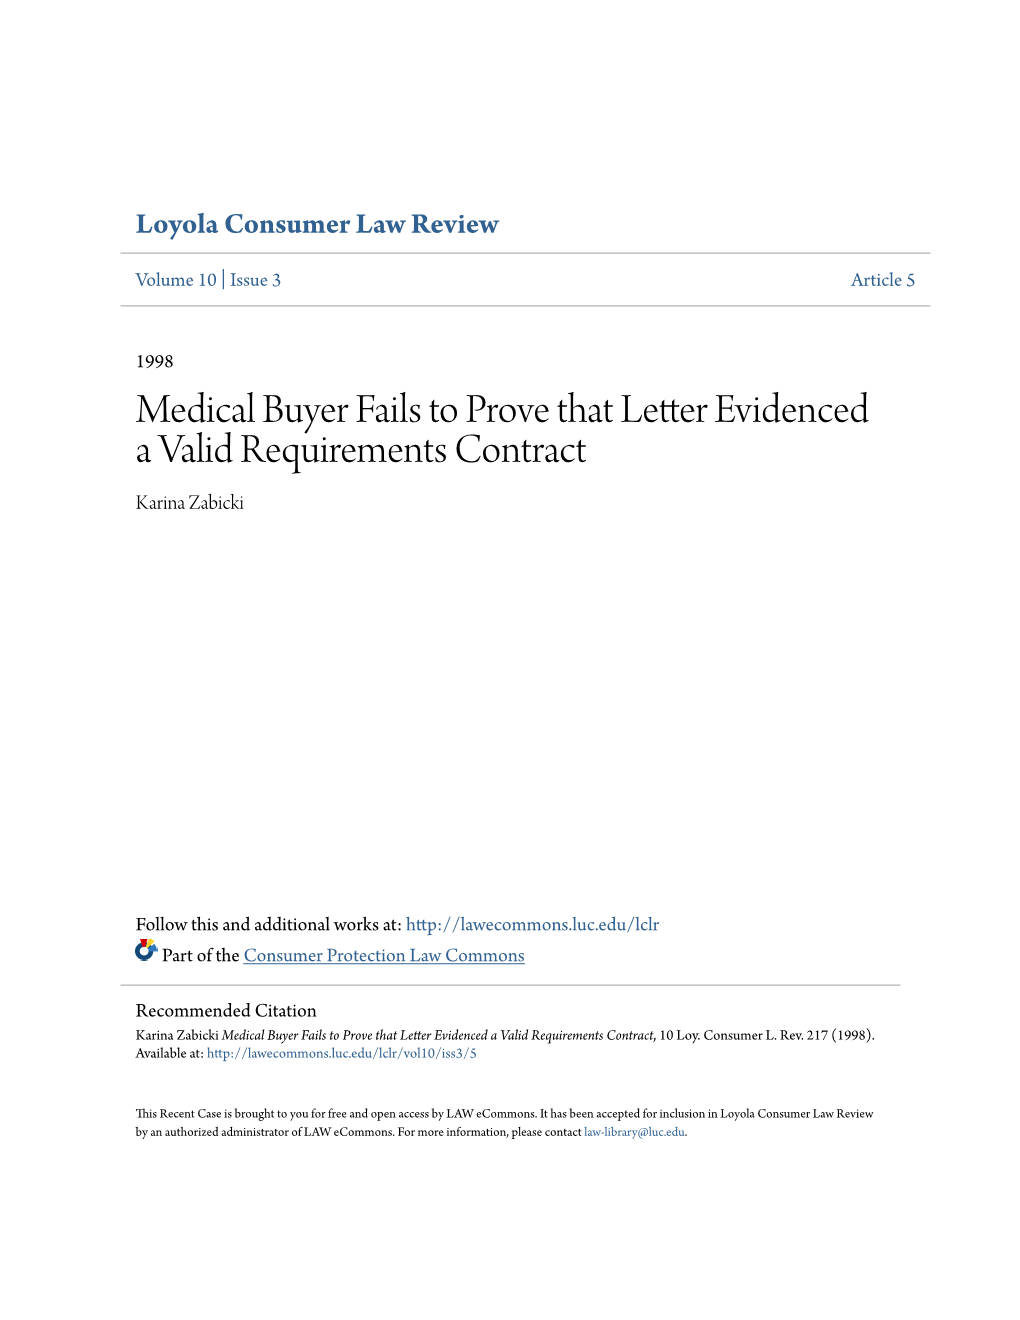 Medical Buyer Fails to Prove That Letter Evidenced a Valid Requirements Contract Karina Zabicki